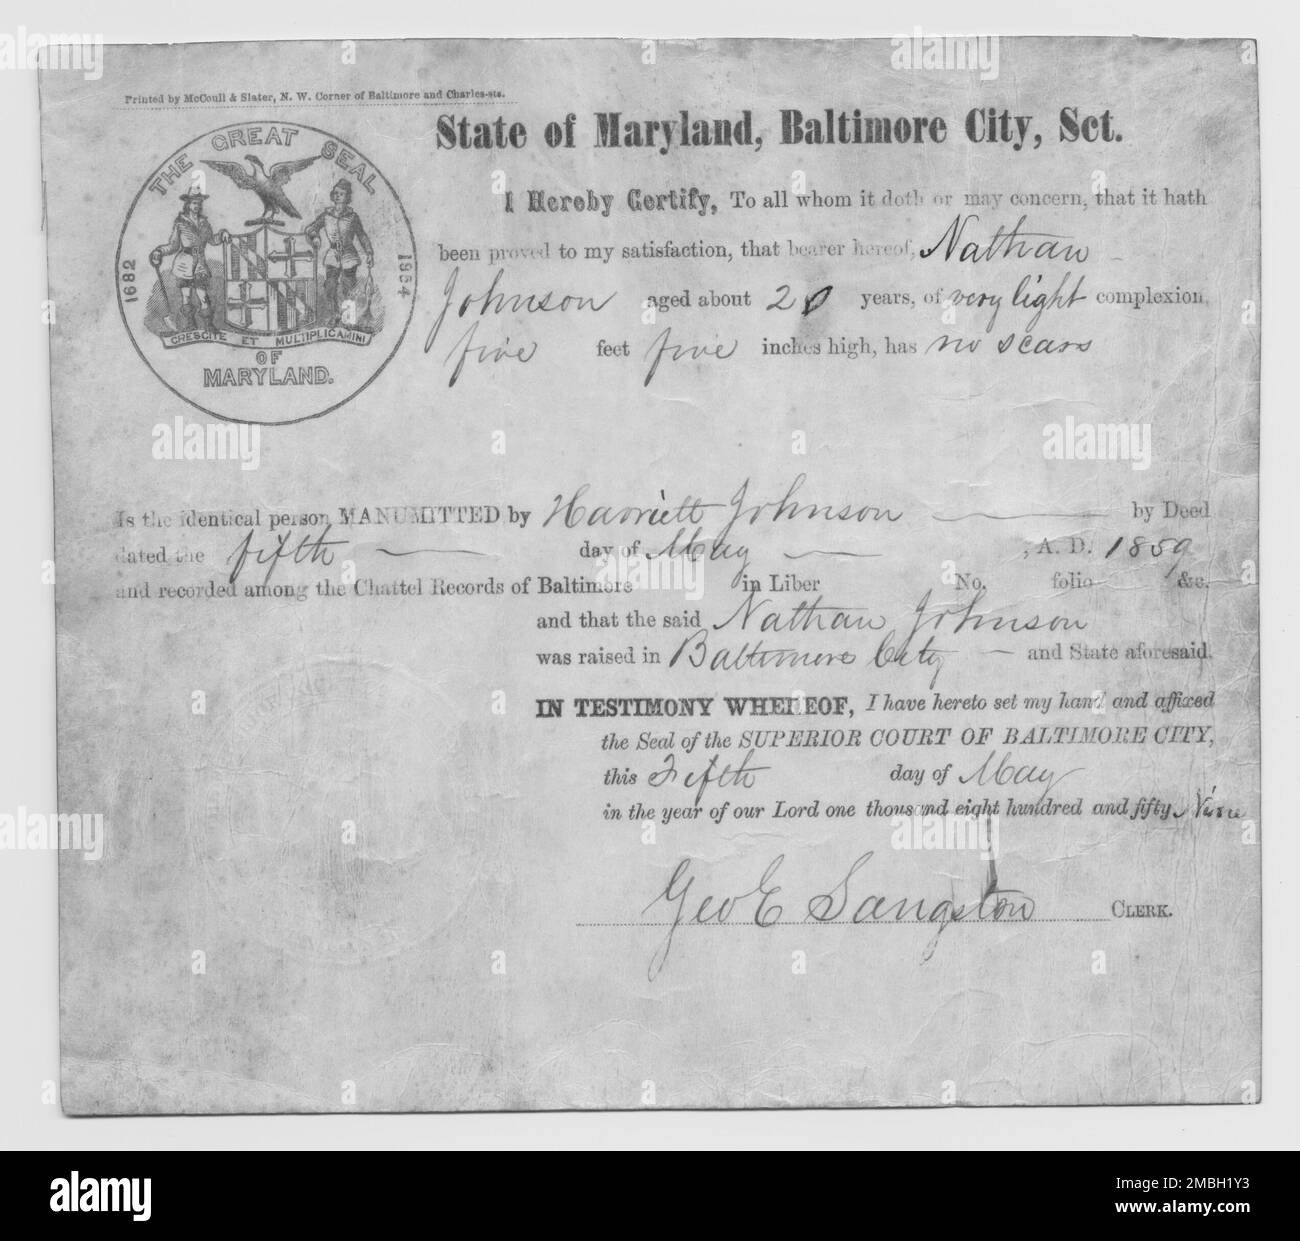 Manumission certificate for Nathan Johnson from &quot;State of Maryland, Baltimore City, Sct&quot;., 1859-05-05. 'I hereby certify, to all whom it doth or may concern, that it hath been proved to my satisfaction, that bearer hereof Nathan Johnson [an African-American man] aged about 20 years, of very light complexion, five feet five inches high, has no scars, Is the identical person Manumitted by Harriett  Johnson by Deed dated fifth day of May, A.D. 1859 and recorded among the Chattel Records of Baltimore...and that the said Nathan Johnson was raised in Baltimore City and State aforesaid. In Stock Photo